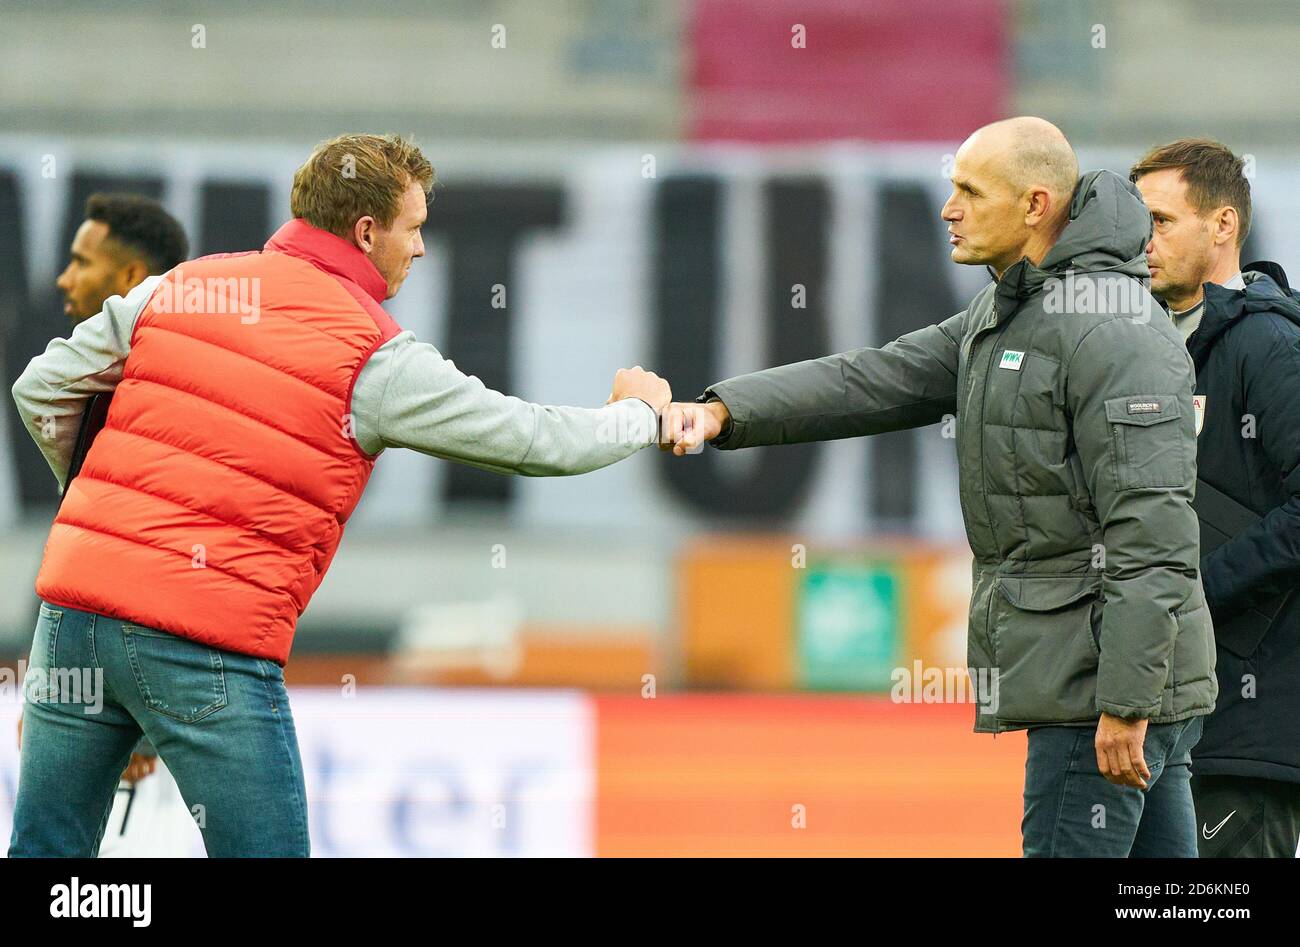 Julian NAGELSMANN, RB Leipzig team manager, coach,  Heiko HERRLICH, FCA coach,   FC AUGSBURG - RB LEIPZIG 1.German Football League , Augsburg, October 17, 2020.  Season 2020/2021, match day 04,  © Peter Schatz / Alamy Live News    - DFL REGULATIONS PROHIBIT ANY USE OF PHOTOGRAPHS as IMAGE SEQUENCES and/or QUASI-VIDEO - Stock Photo